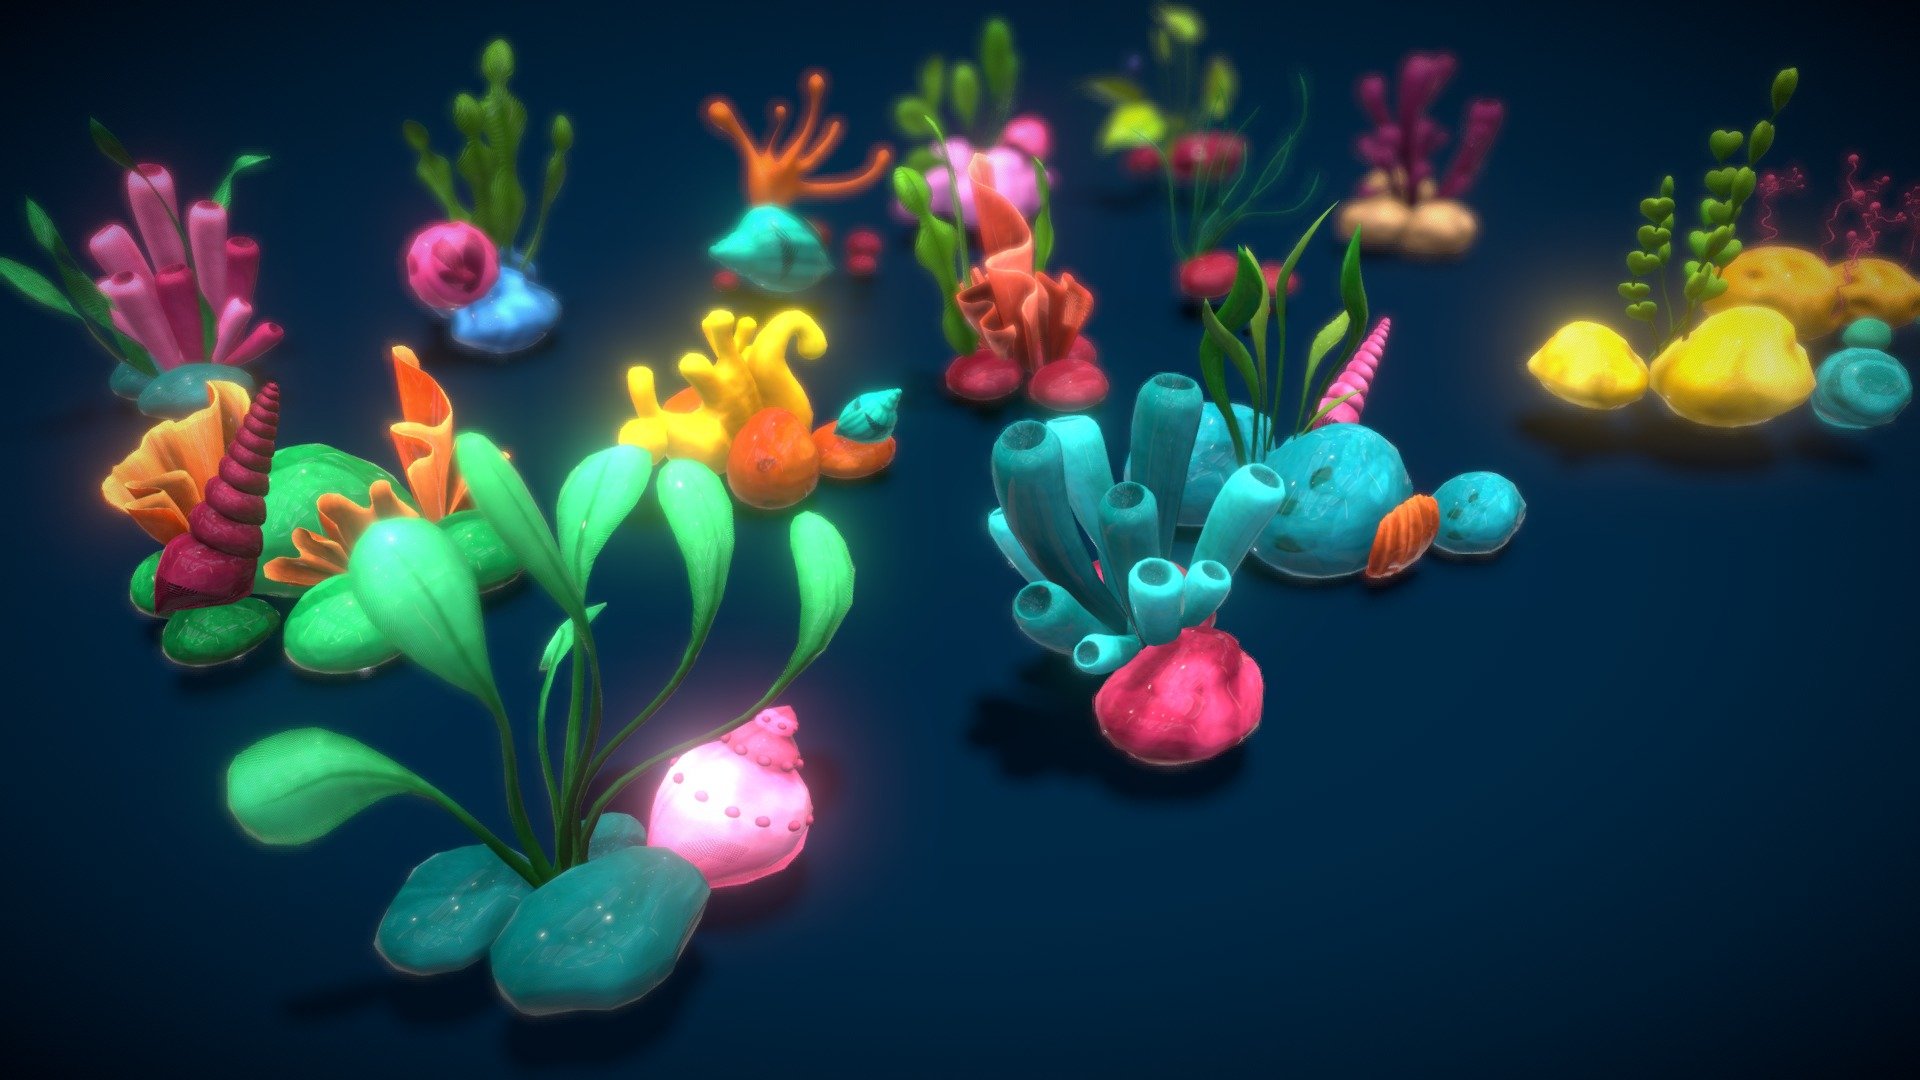 This is Cartoon Seaweed 4 is now available with animation for some coral!
As its name, this asset is extensively packed for easy creation of complex underwater environments.
All elements help you to create a colorful world for an aquarium game, fishing game, or simply decoration item in your social game!
Pack contains 15 +prefabs, easy to customize your own forest of underwater plants. In detail, the model is attached as below:
- Seaweed : 15+ types in the 100+ variations
Atlas texture with size 1024x1024.
Geometry:
+Triangles: 85347
+Polygons: 46346
+Vertices: 44050 - Cartoon Seaweed 4 - Buy Royalty Free 3D model by vustudios 3d model